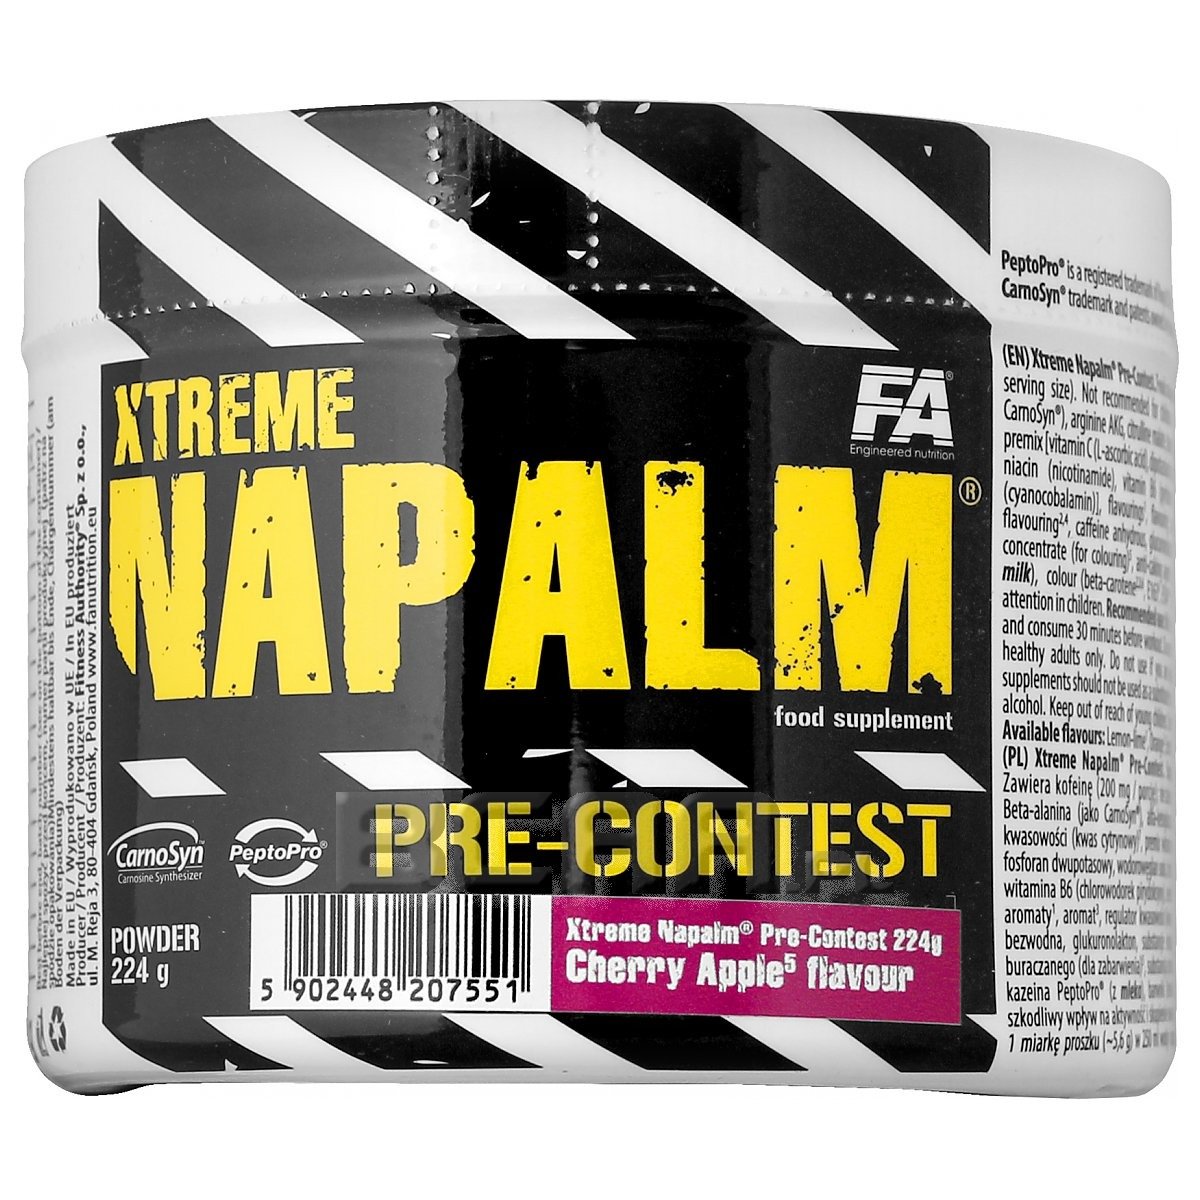 Xtreme Napalm Pre-Contest, 224 g, Fitness Authority. Pre Workout. Energy & Endurance 